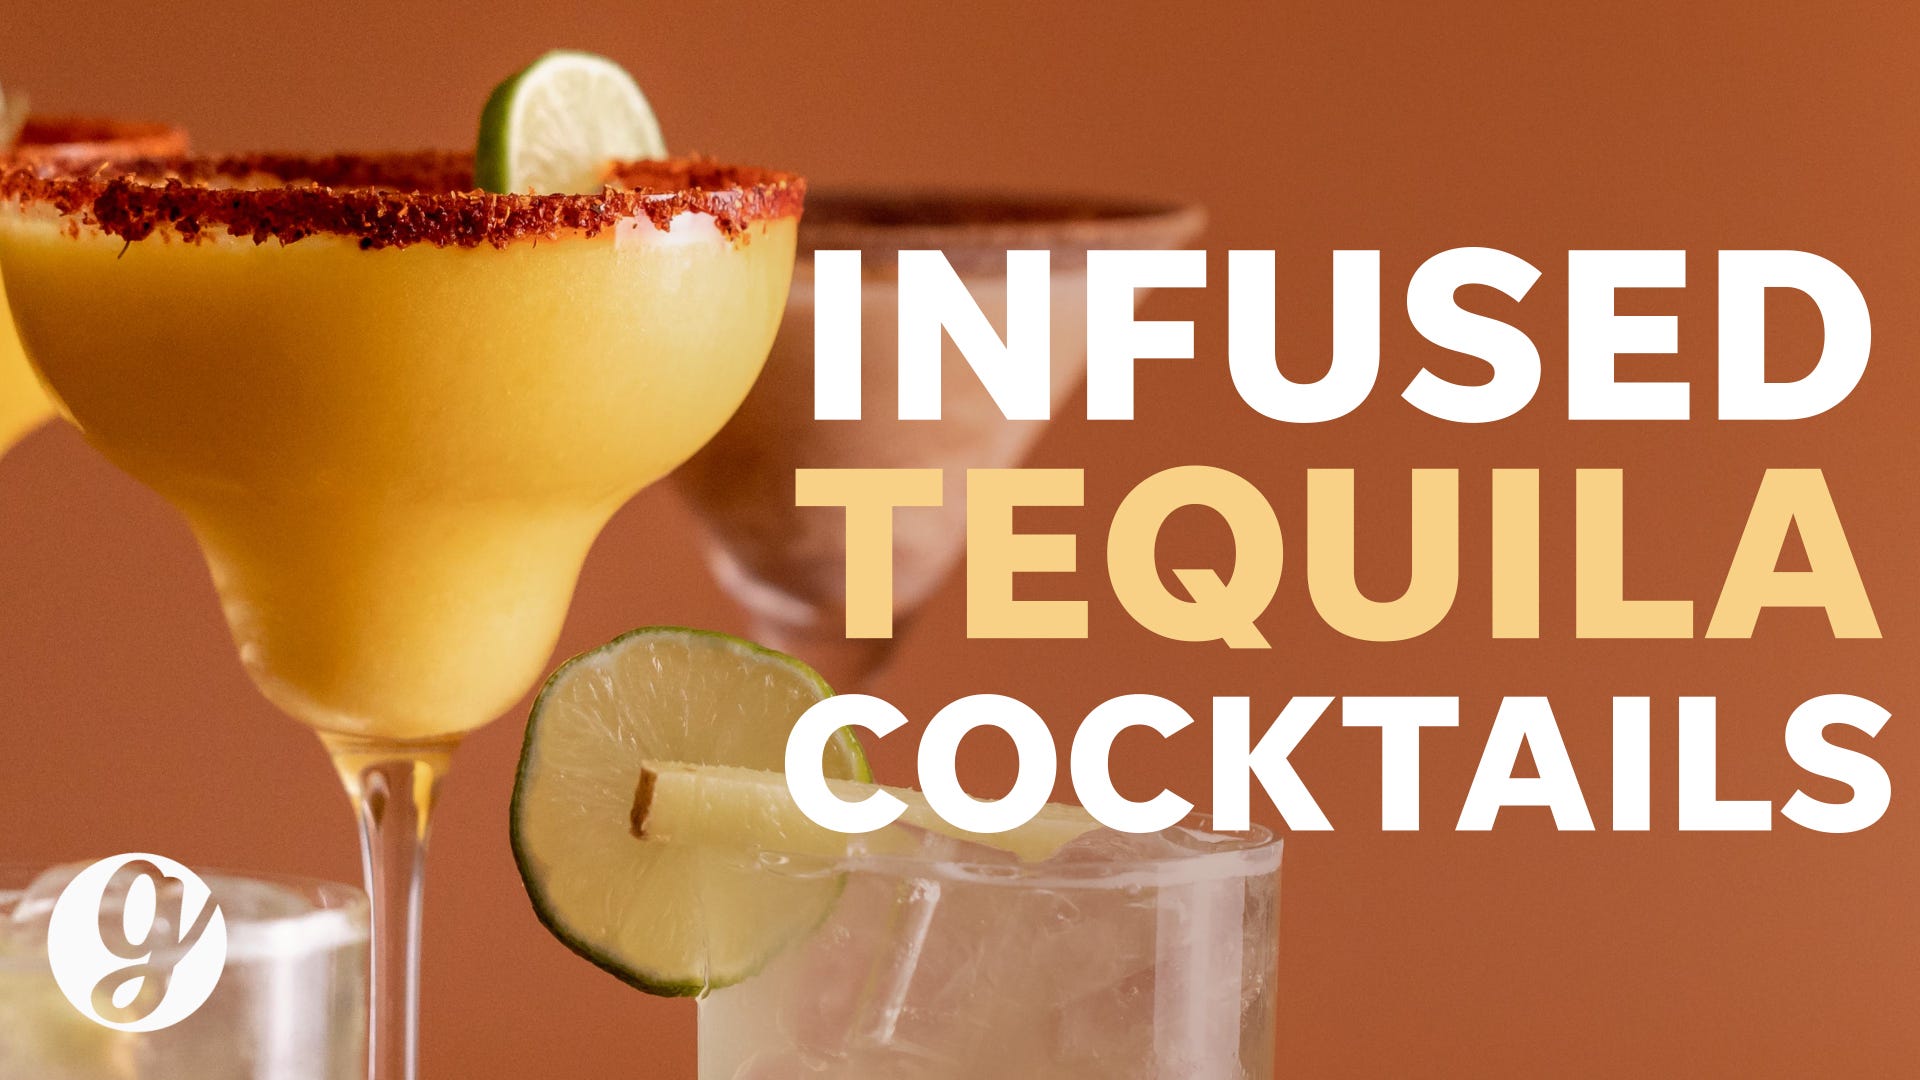 Tequila cocktails (besides margaritas) for National Tequila Day thumbnail